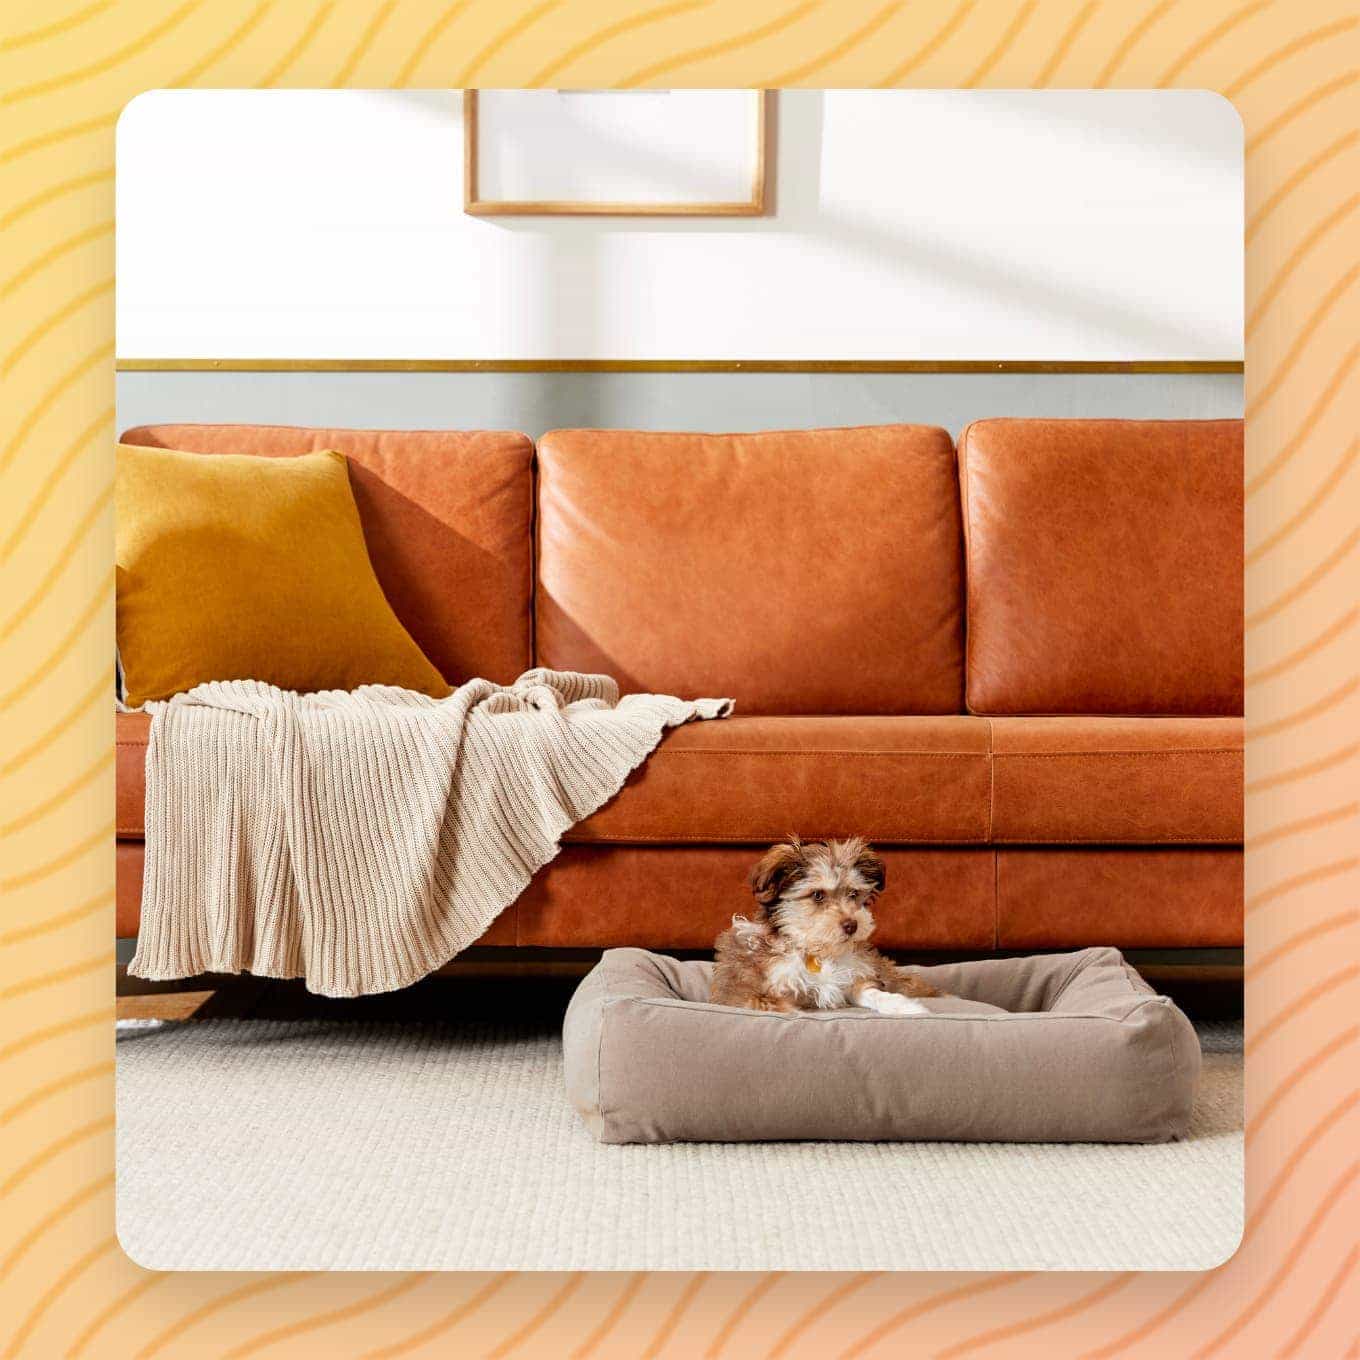 A dog sitting inside of a Canvas Bolster Dog Bed from Parachute Home